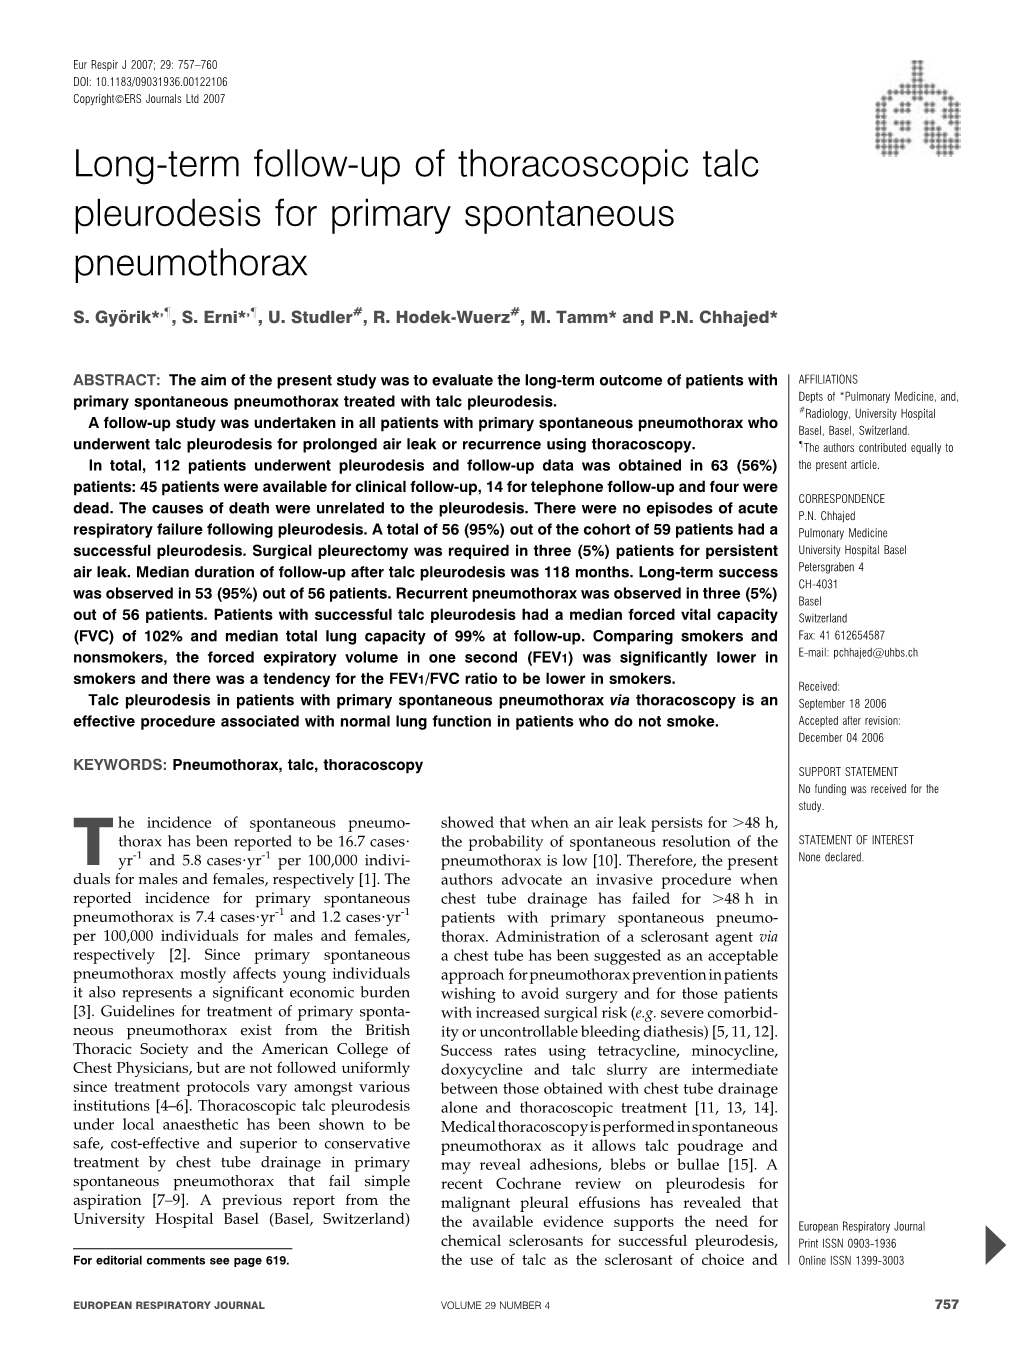 Long-Term Follow-Up of Thoracoscopic Talc Pleurodesis for Primary Spontaneous Pneumothorax